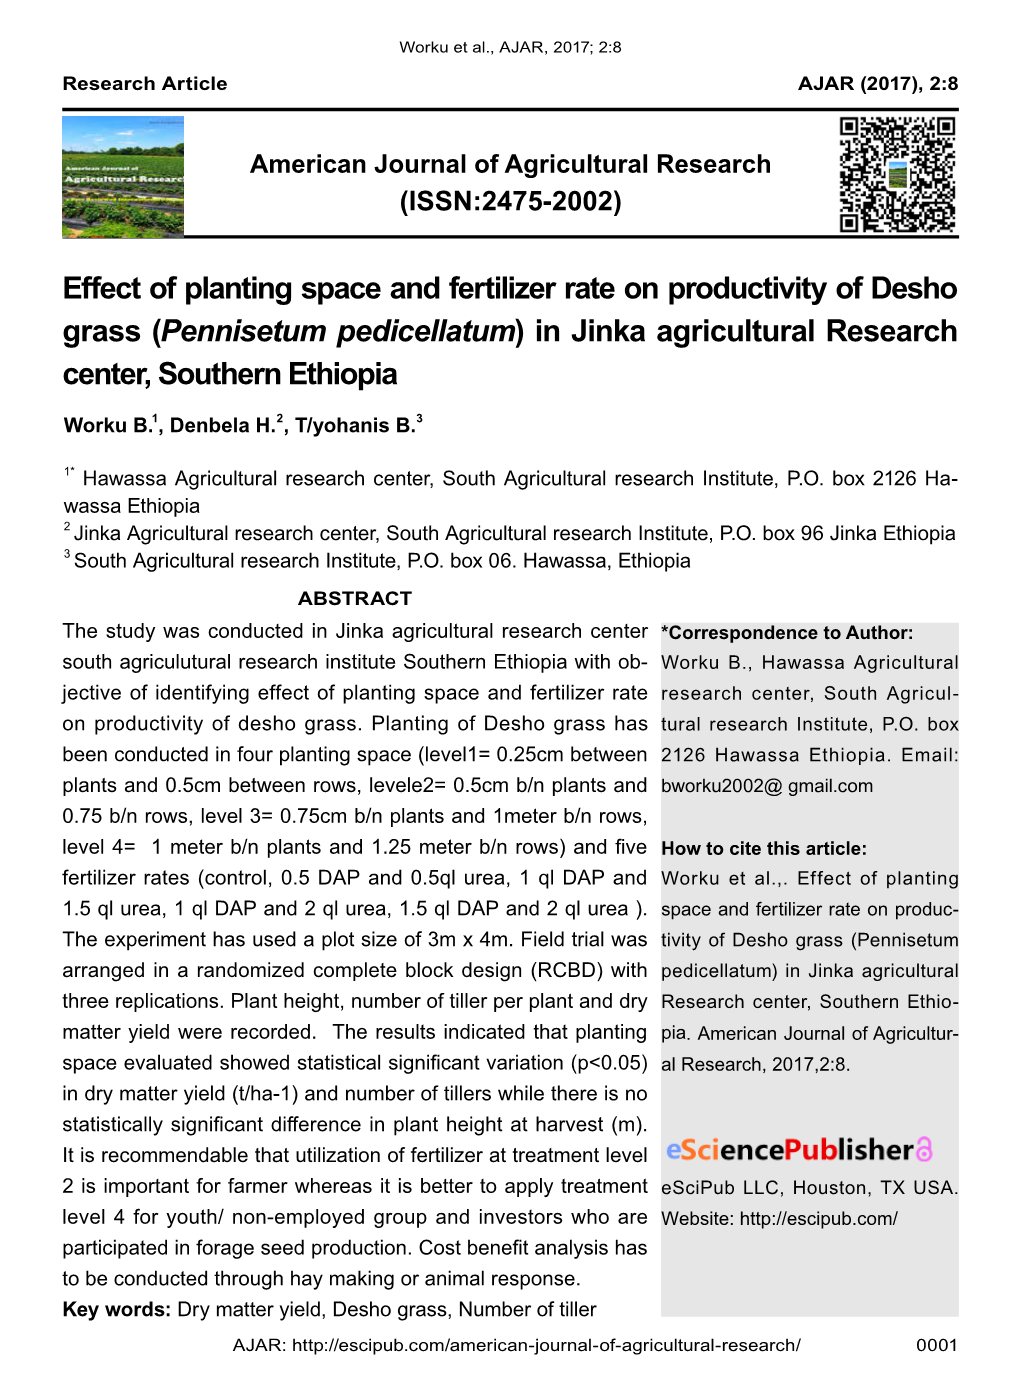 Effect of Planting Space and Fertilizer Rate on Productivity of Desho Grass (Pennisetum Pedicellatum) in Jinka Agricultural Research Center, Southern Ethiopia